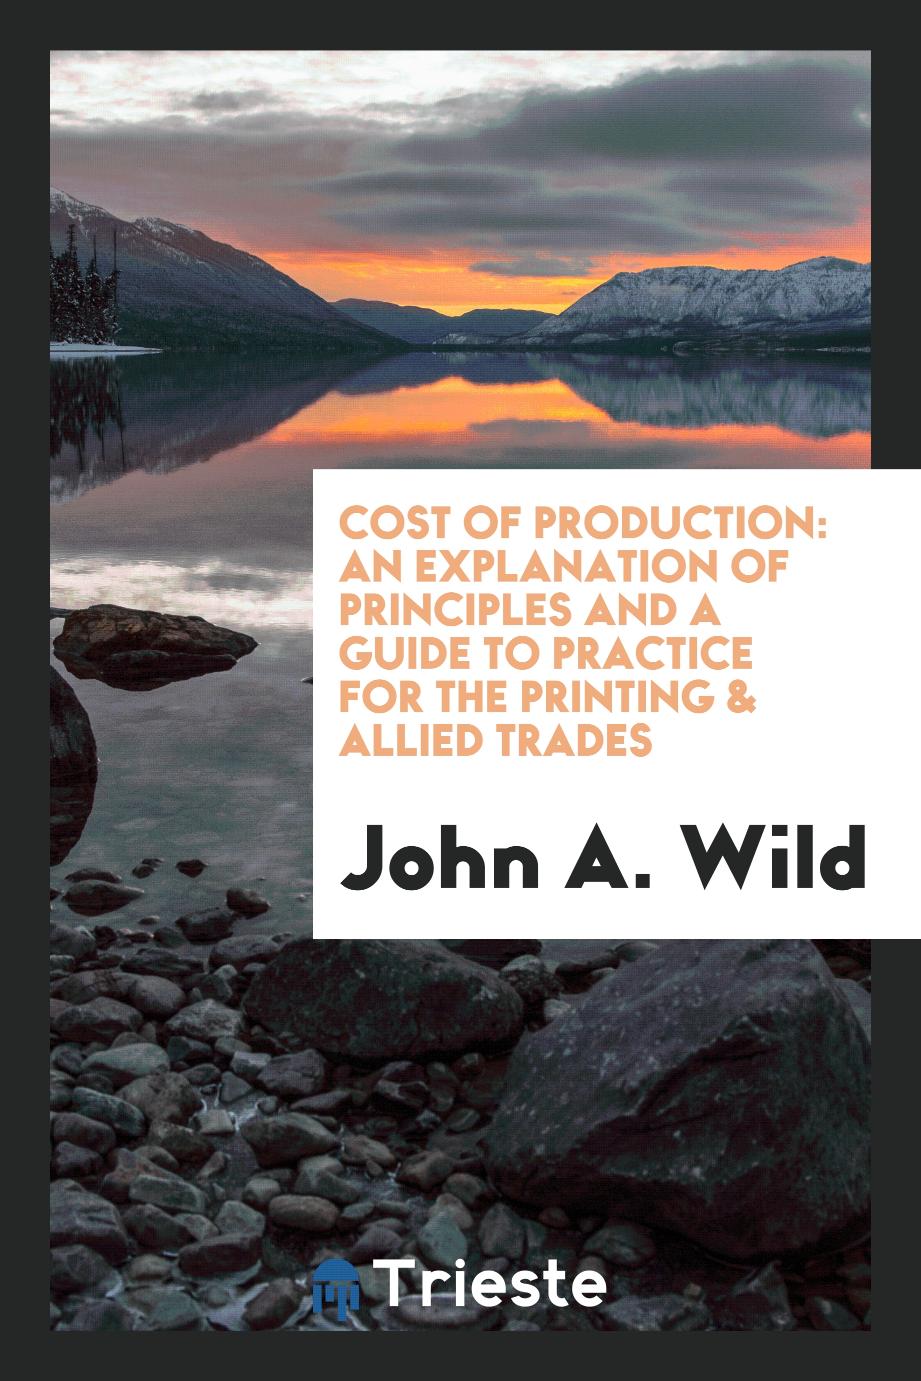 Cost of Production: An Explanation of Principles and a Guide to Practice for the printing & Allied Trades